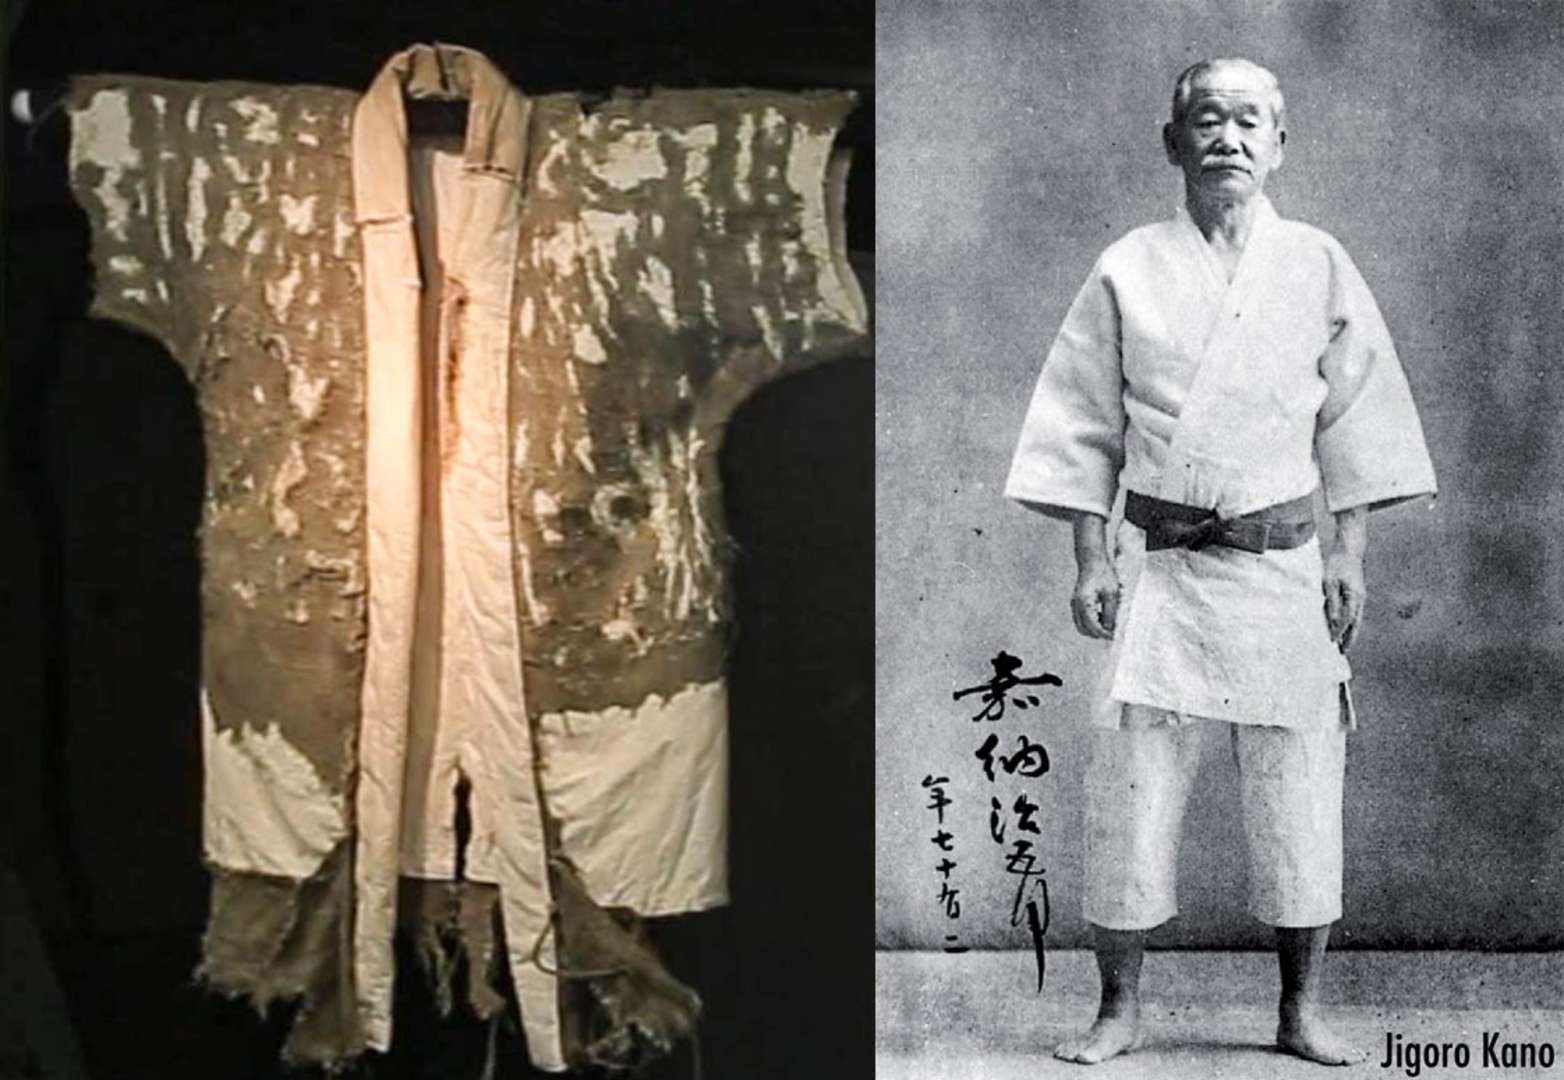 One of the very first judogi used by Jigoro Kano